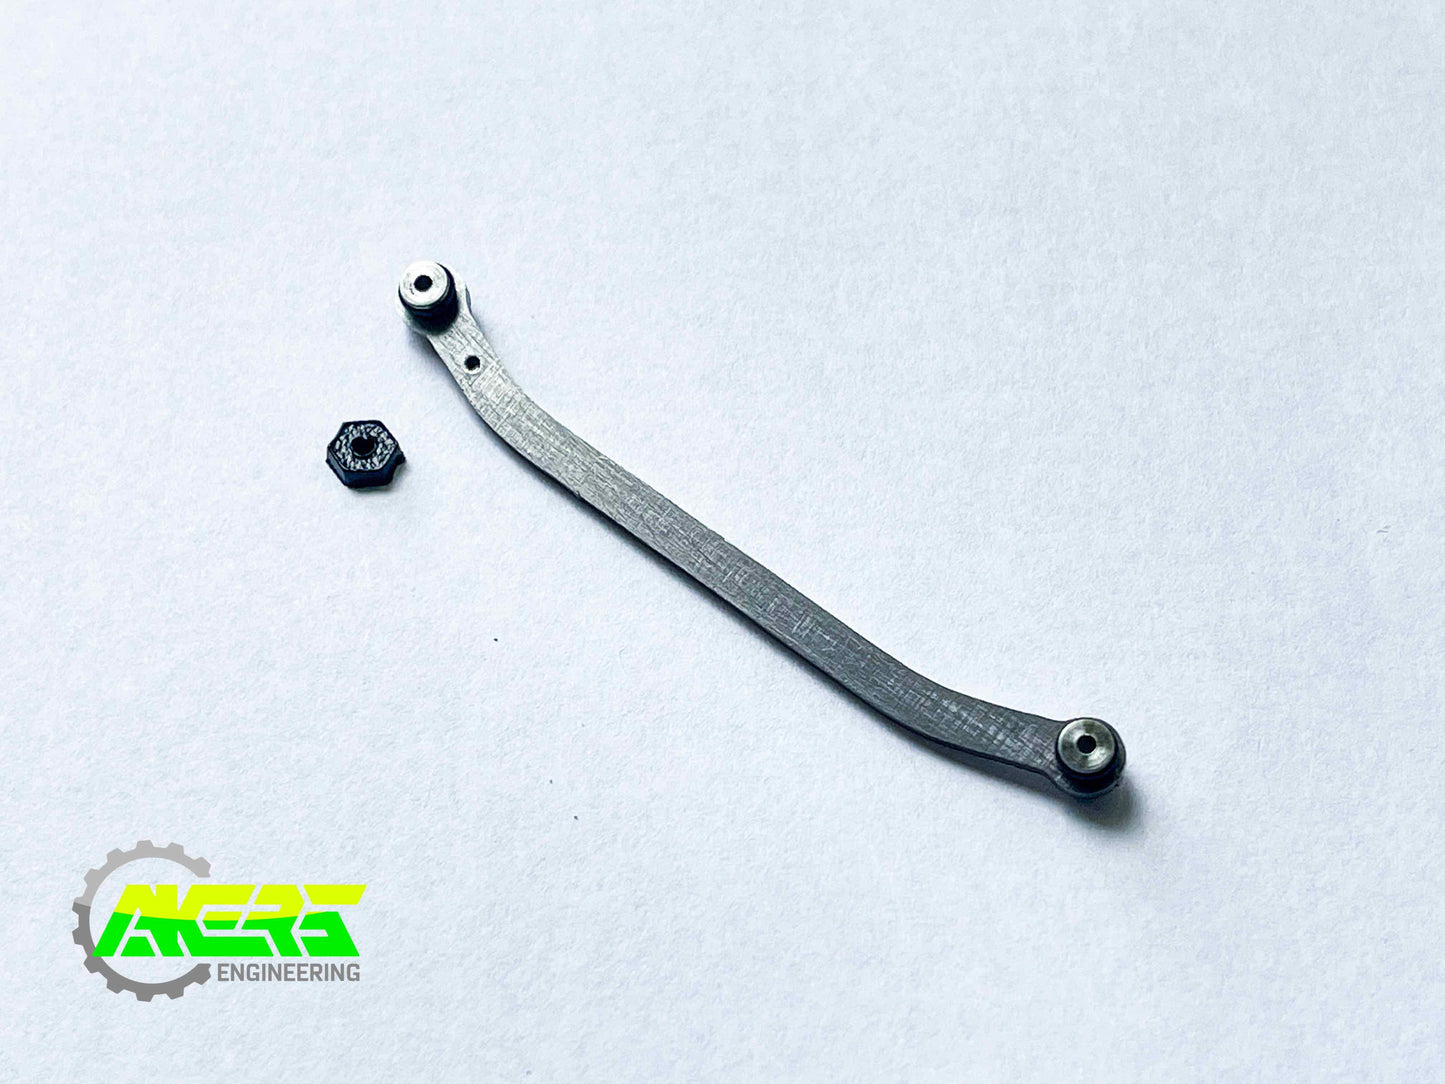 High-angle Steering Tie Rod for SCX24 Axle (Stock width)